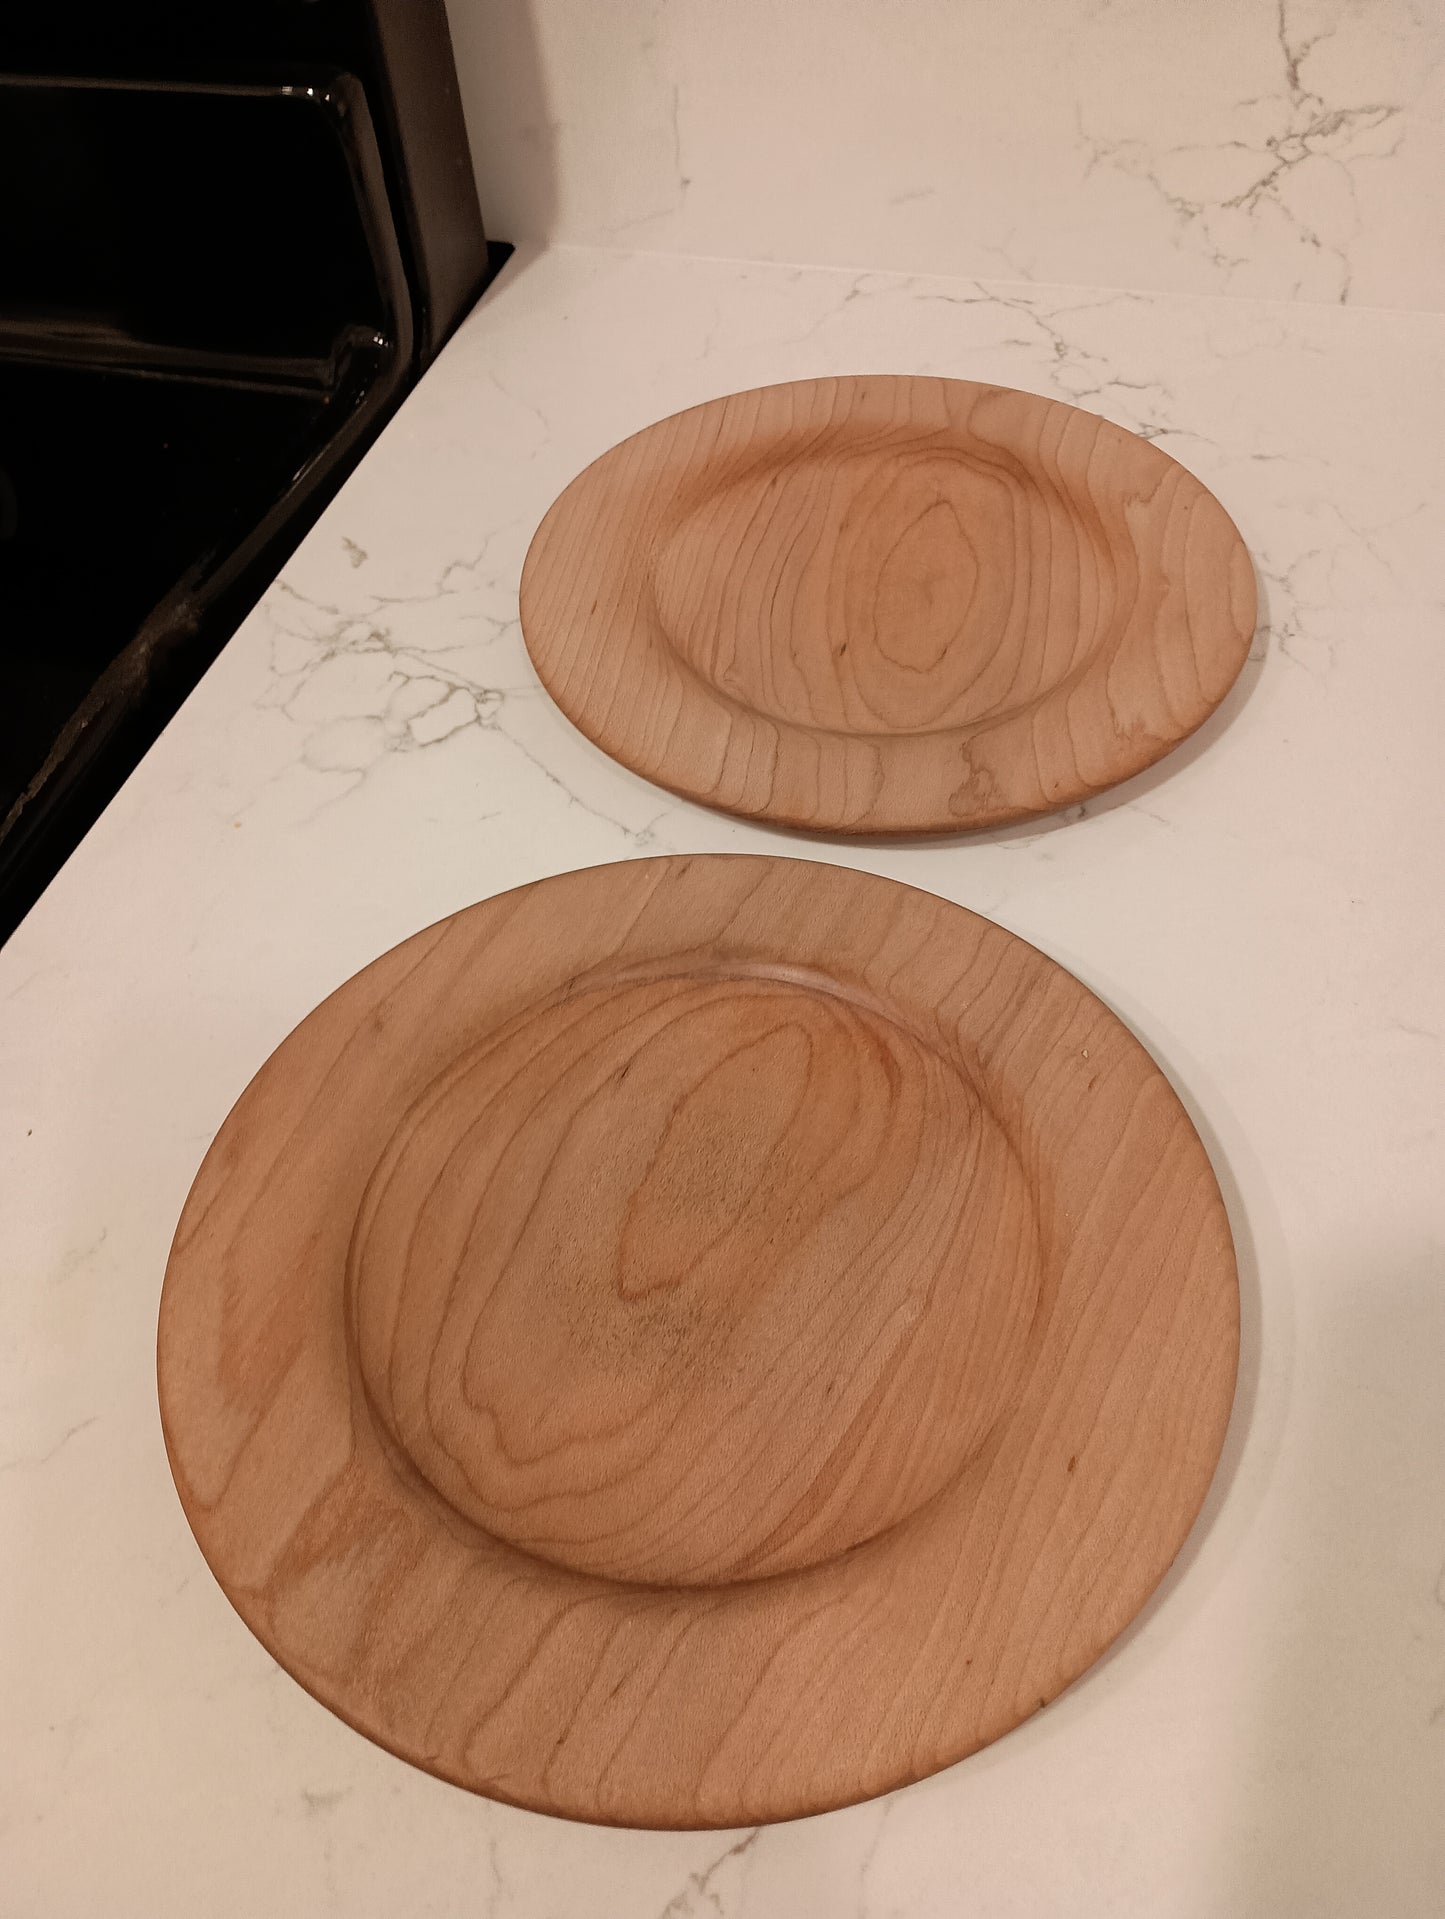 Set of Two Maple Plates, American Revolutionary War Trencher Style